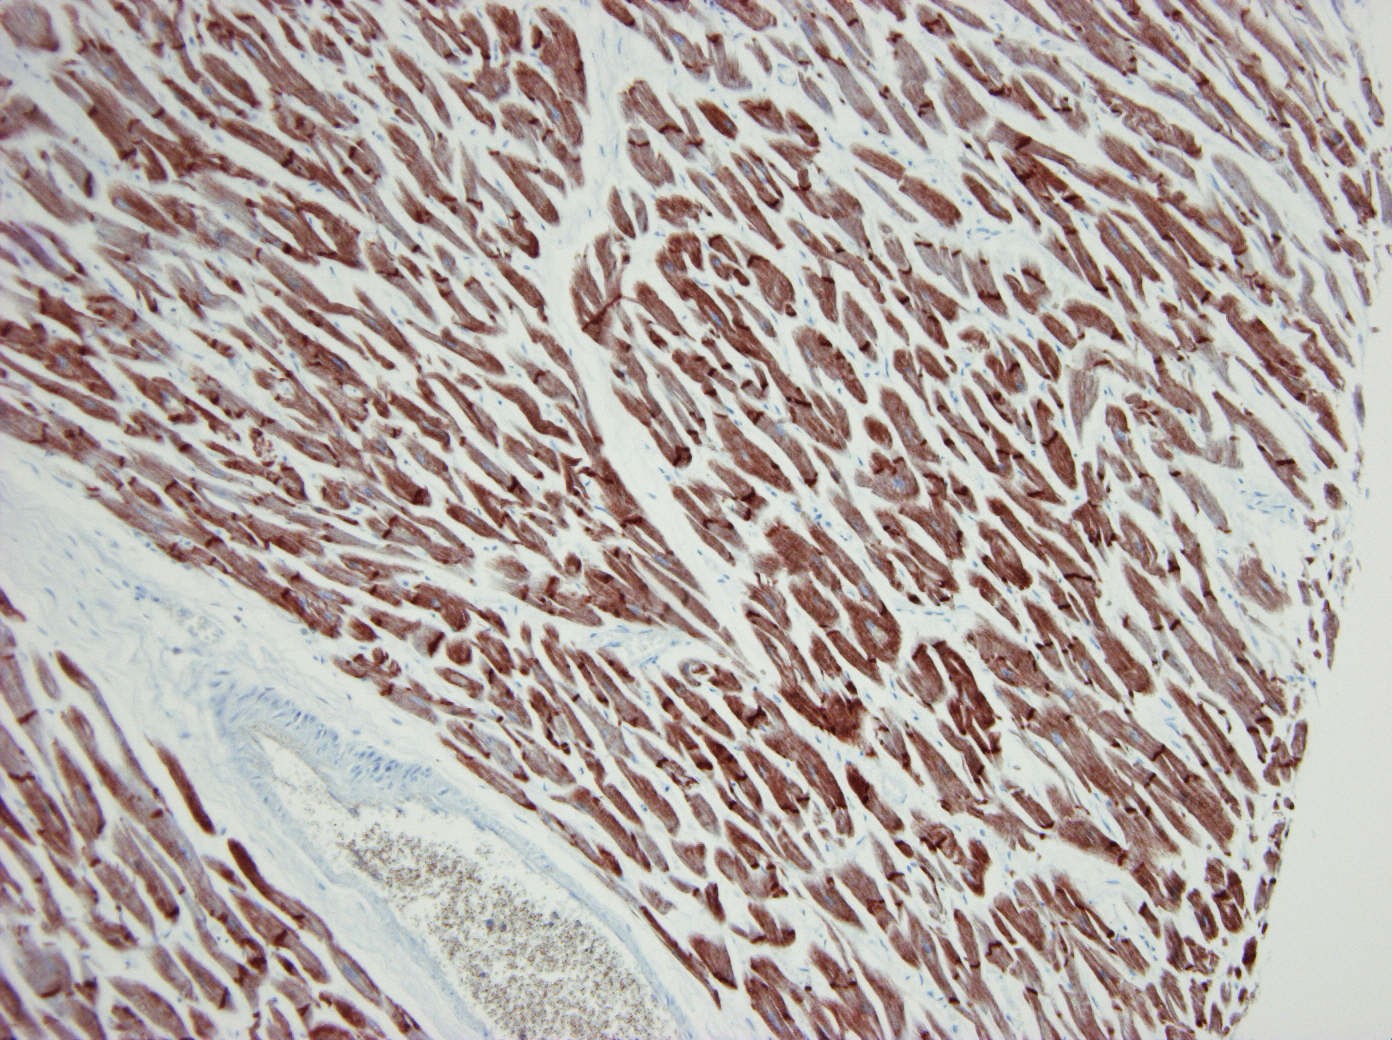 Figure 1. Formalin fixed, paraffin embedded human heart tissue immunostained for alpha cardiac actin using MUB0109P (clone 22D3) at a 500x dilution. Note the strong staining of cardiac muscle tissue.